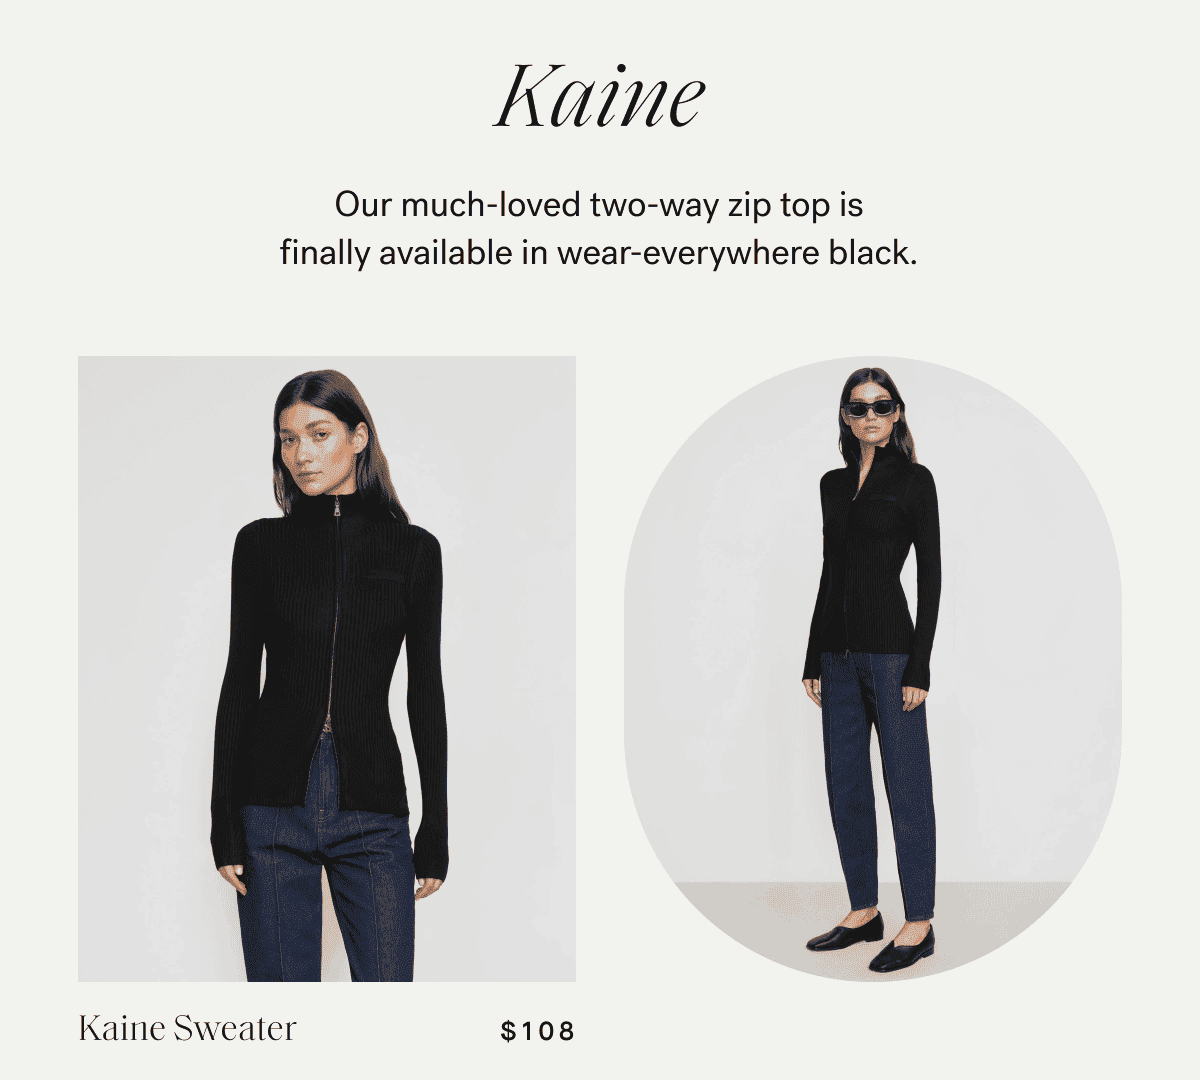 Kaine —\xa0Our much-loved two-way zip top is finally available in wear-everywhere black.